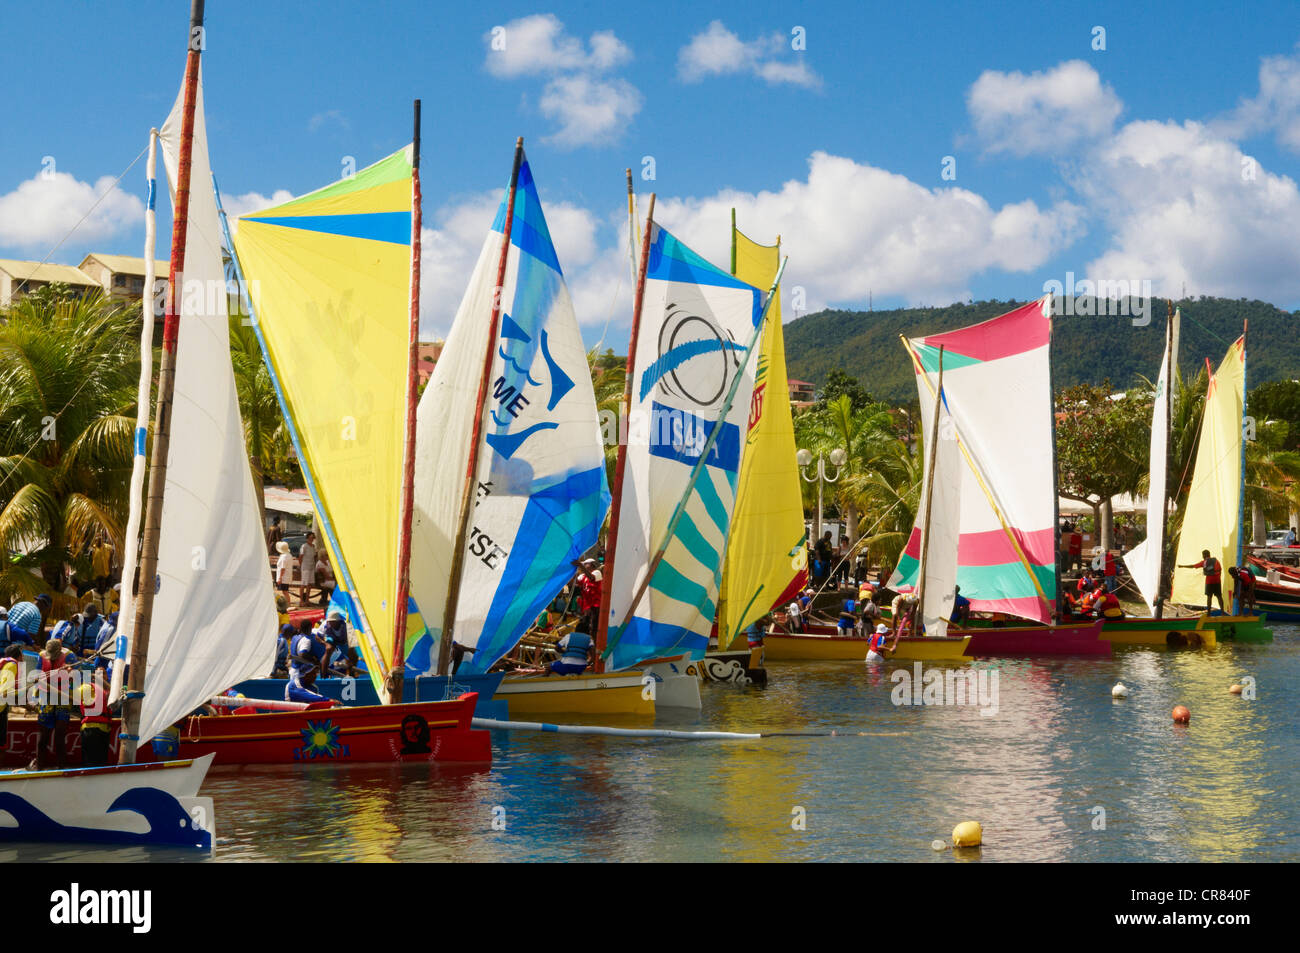 France, Martinique (French West Indies), Les Trois-Ilets, Gommier (traditional boat) race Stock Photo